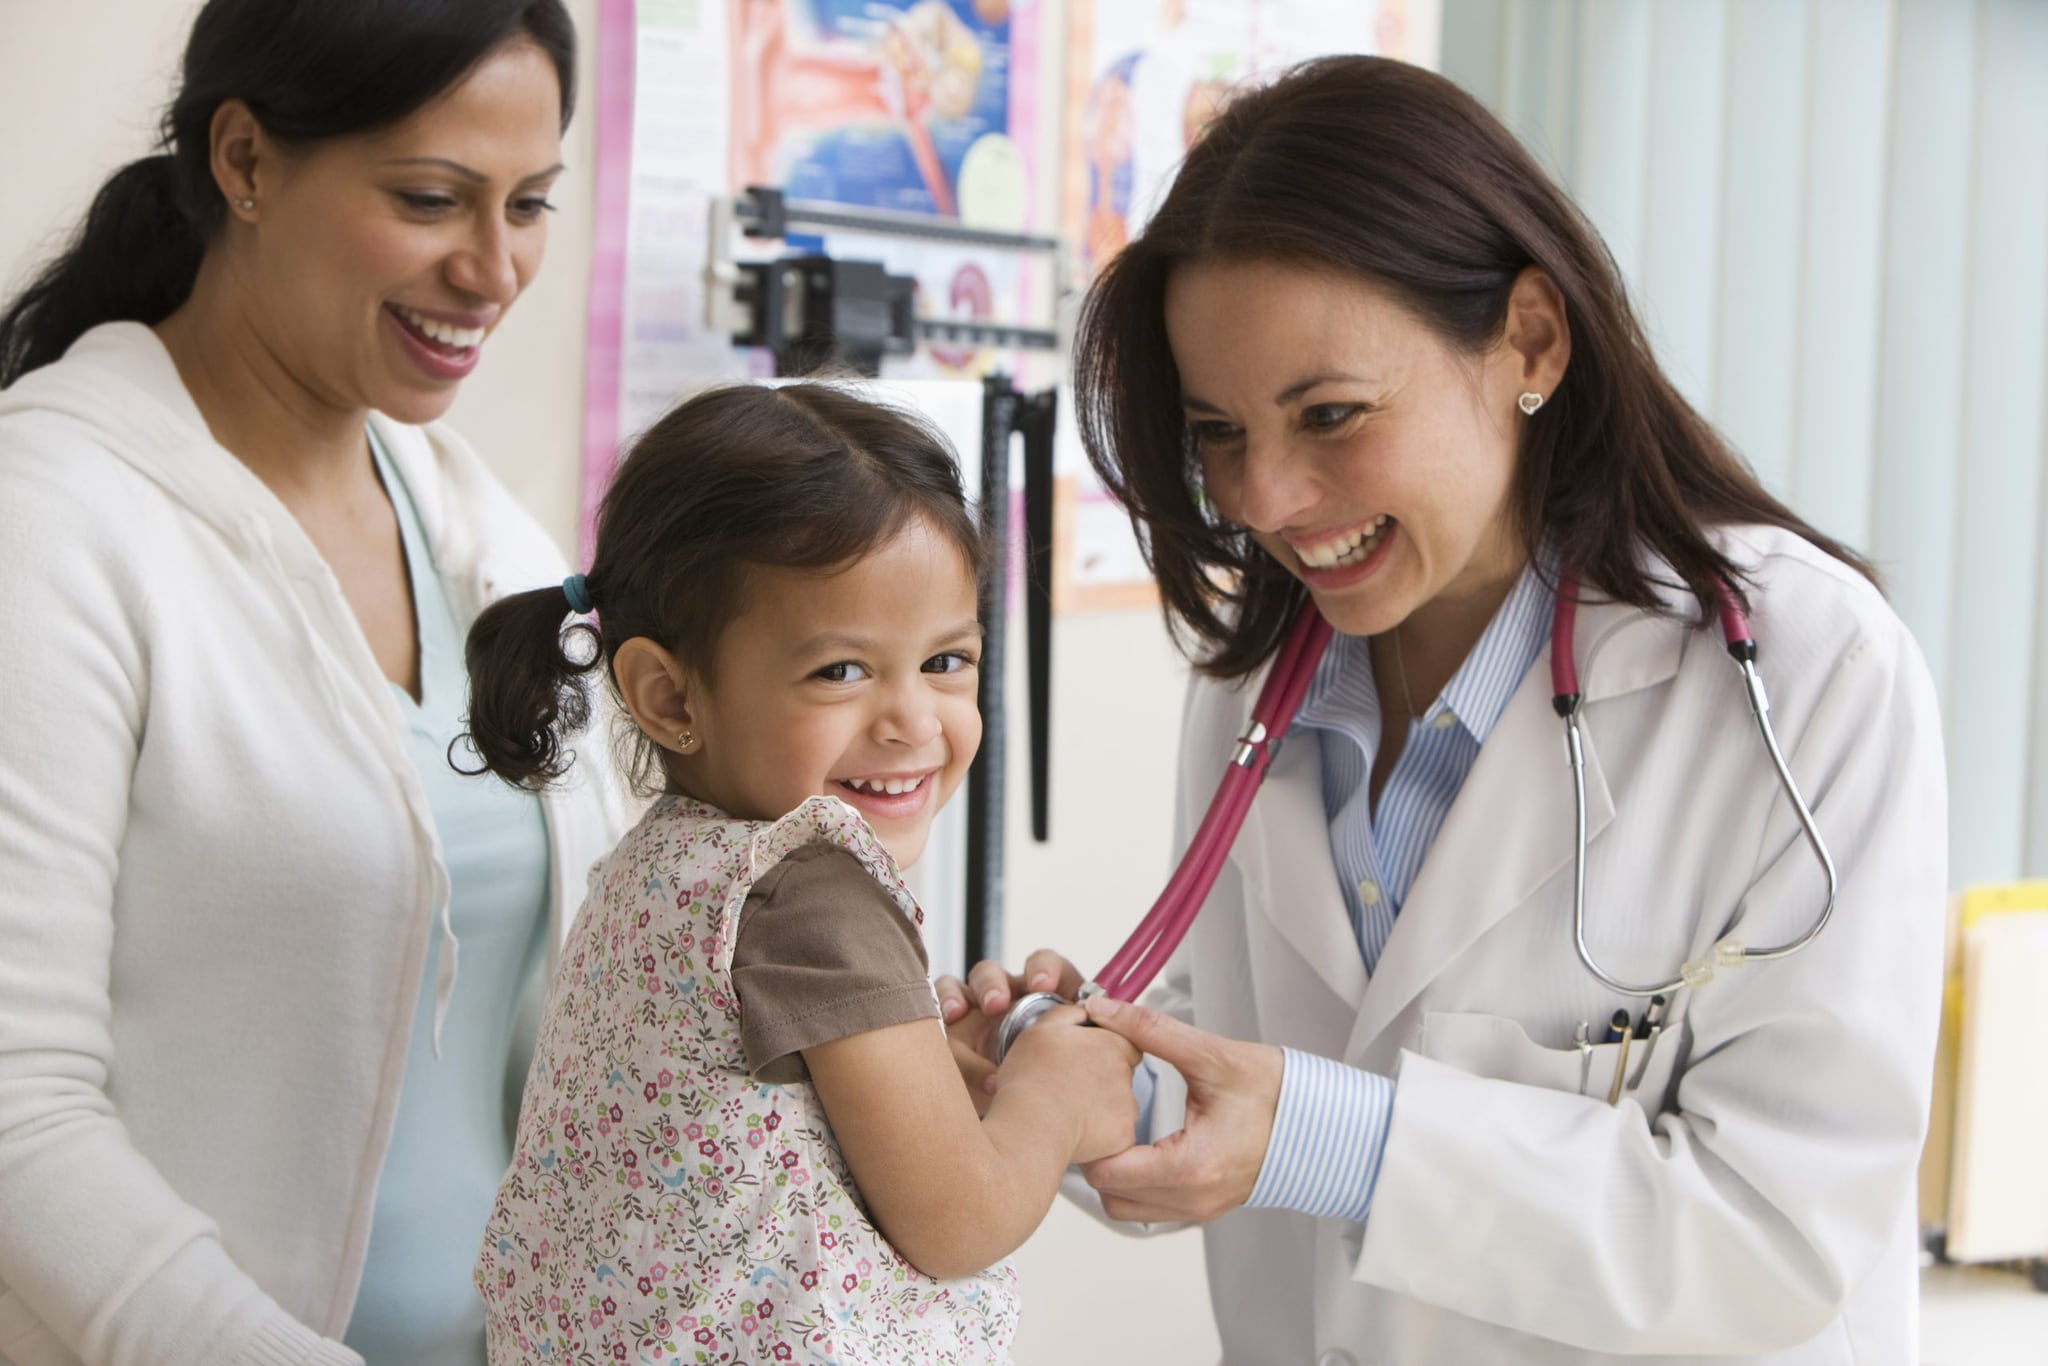 Toddler girl laughing while doctor examines